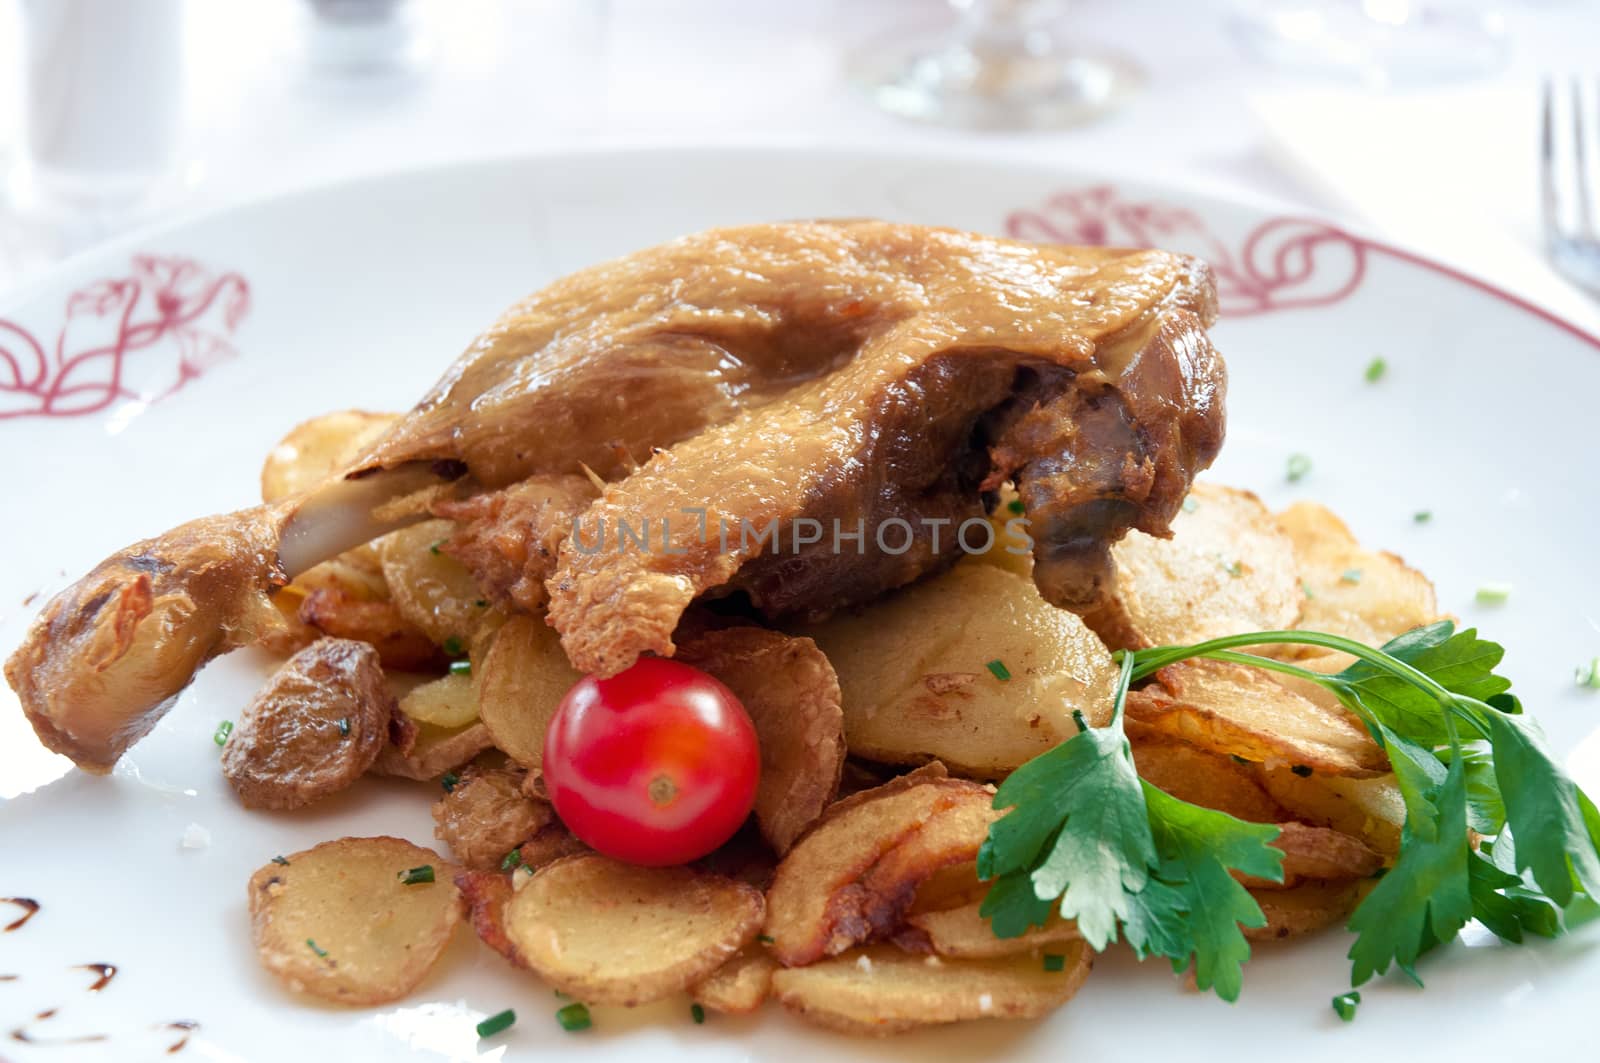 Duck confit, roasted duck leg with potatoes . by LarisaP